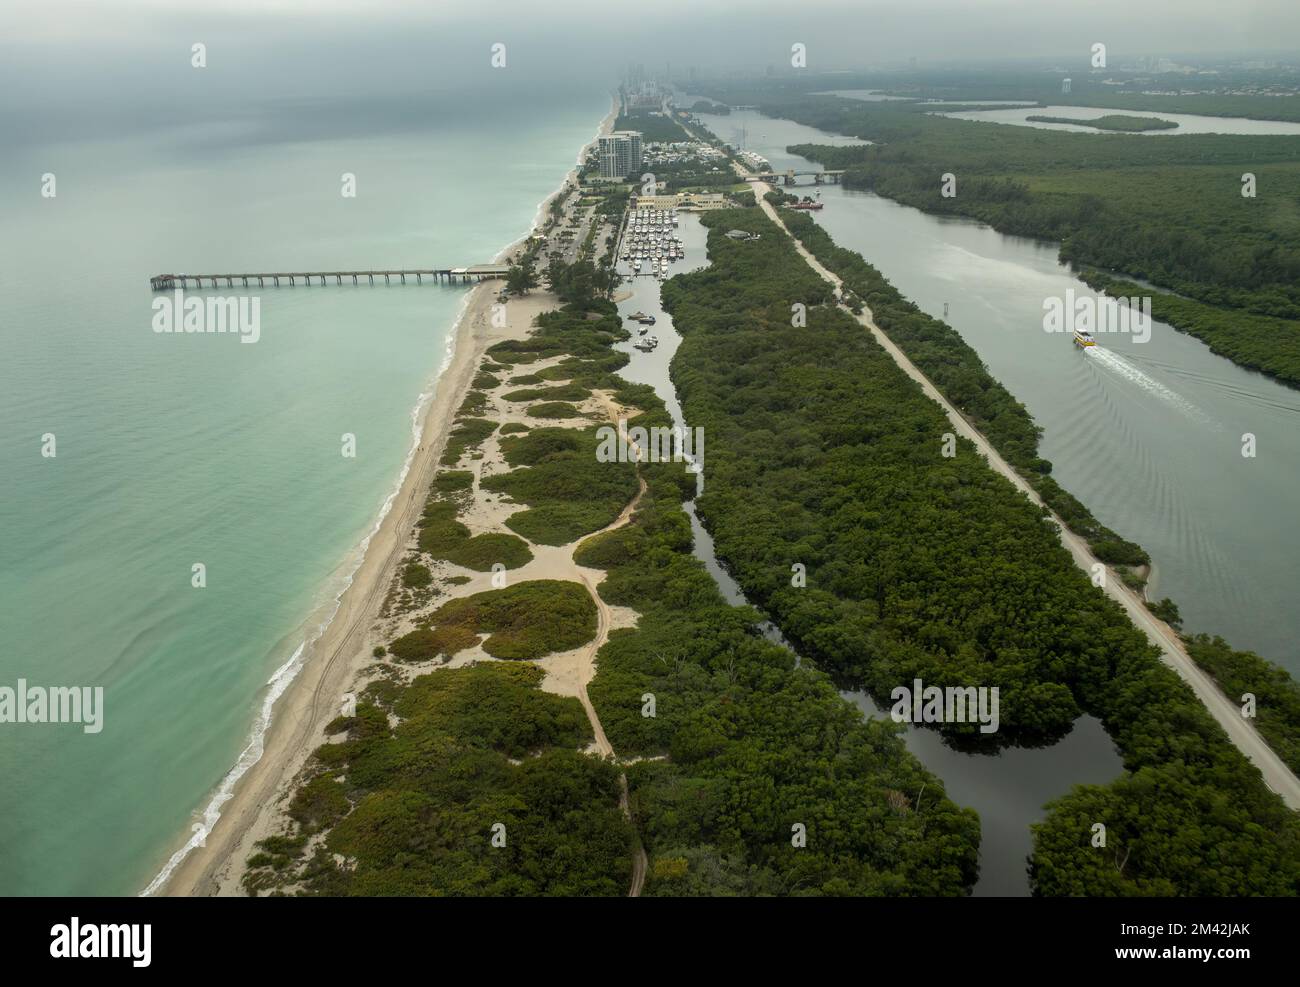 The Stranahan River and coast near Fort Lauderdale in Florida, USA Stock Photo